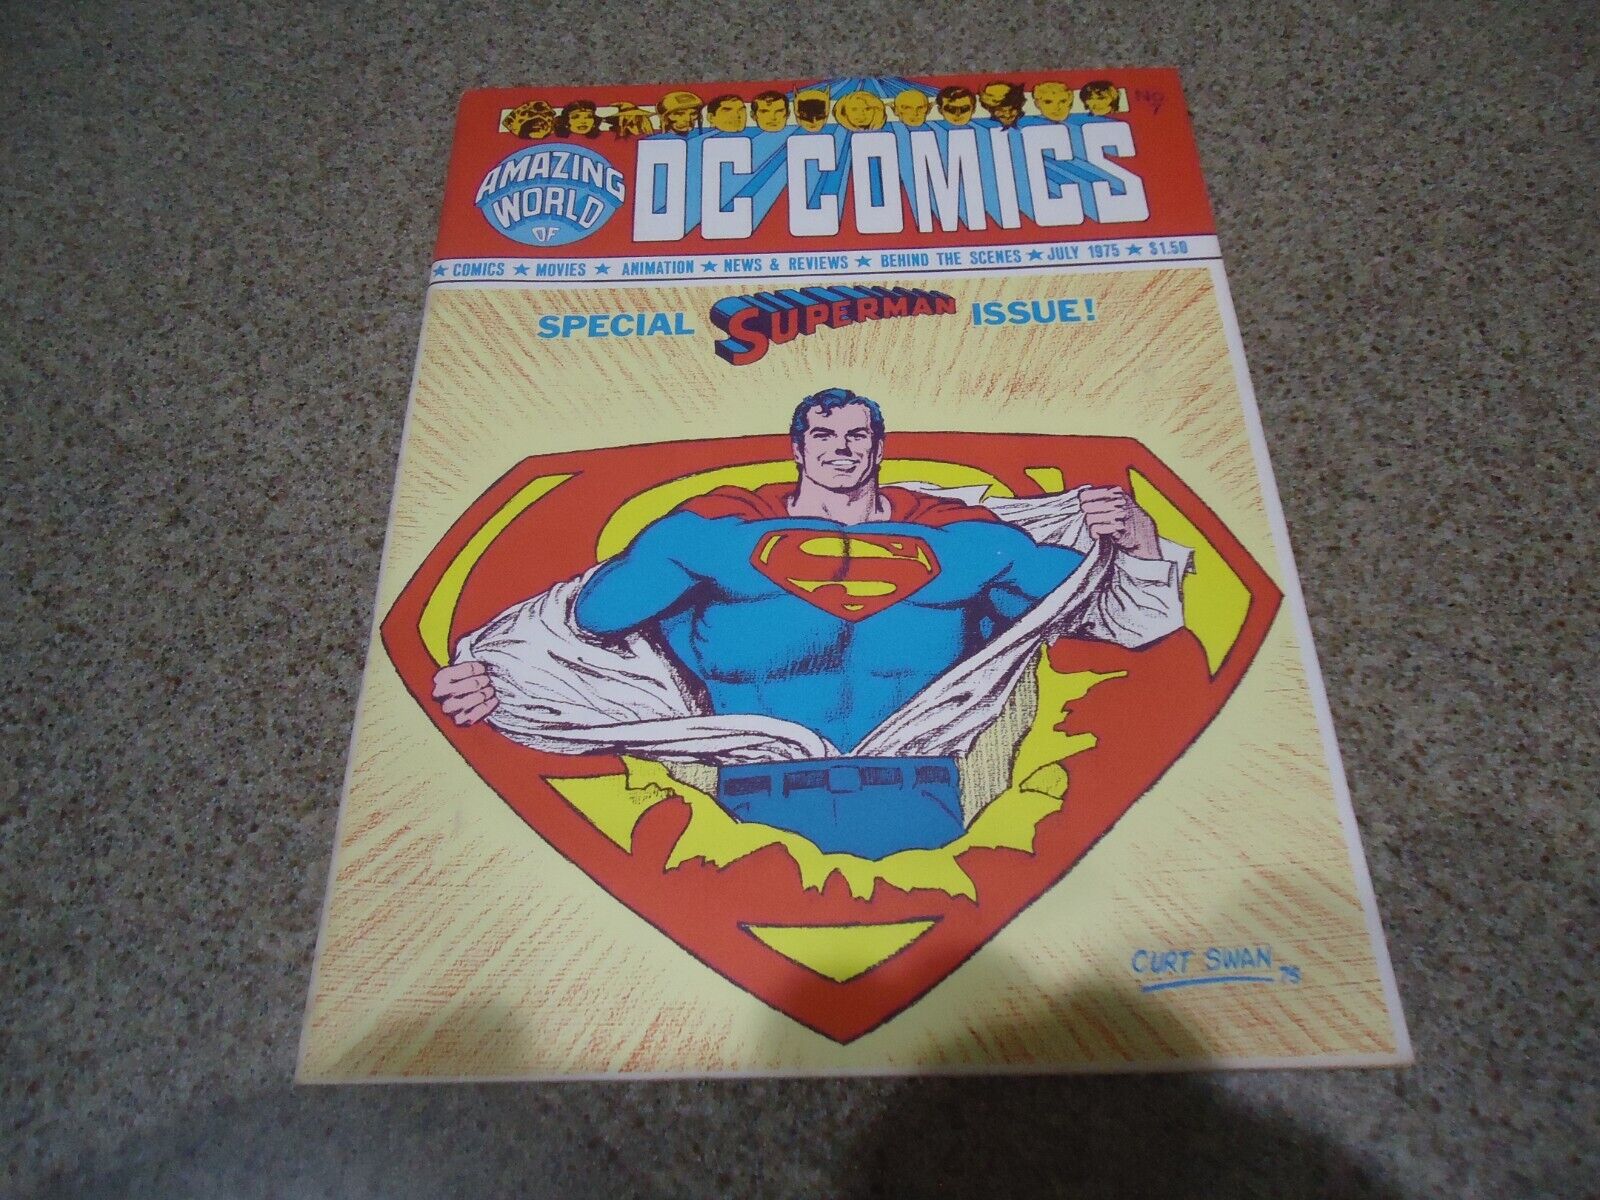 AMAZING WORLD OF DC COMICS #7 HIGH GRADE WITH POSTER